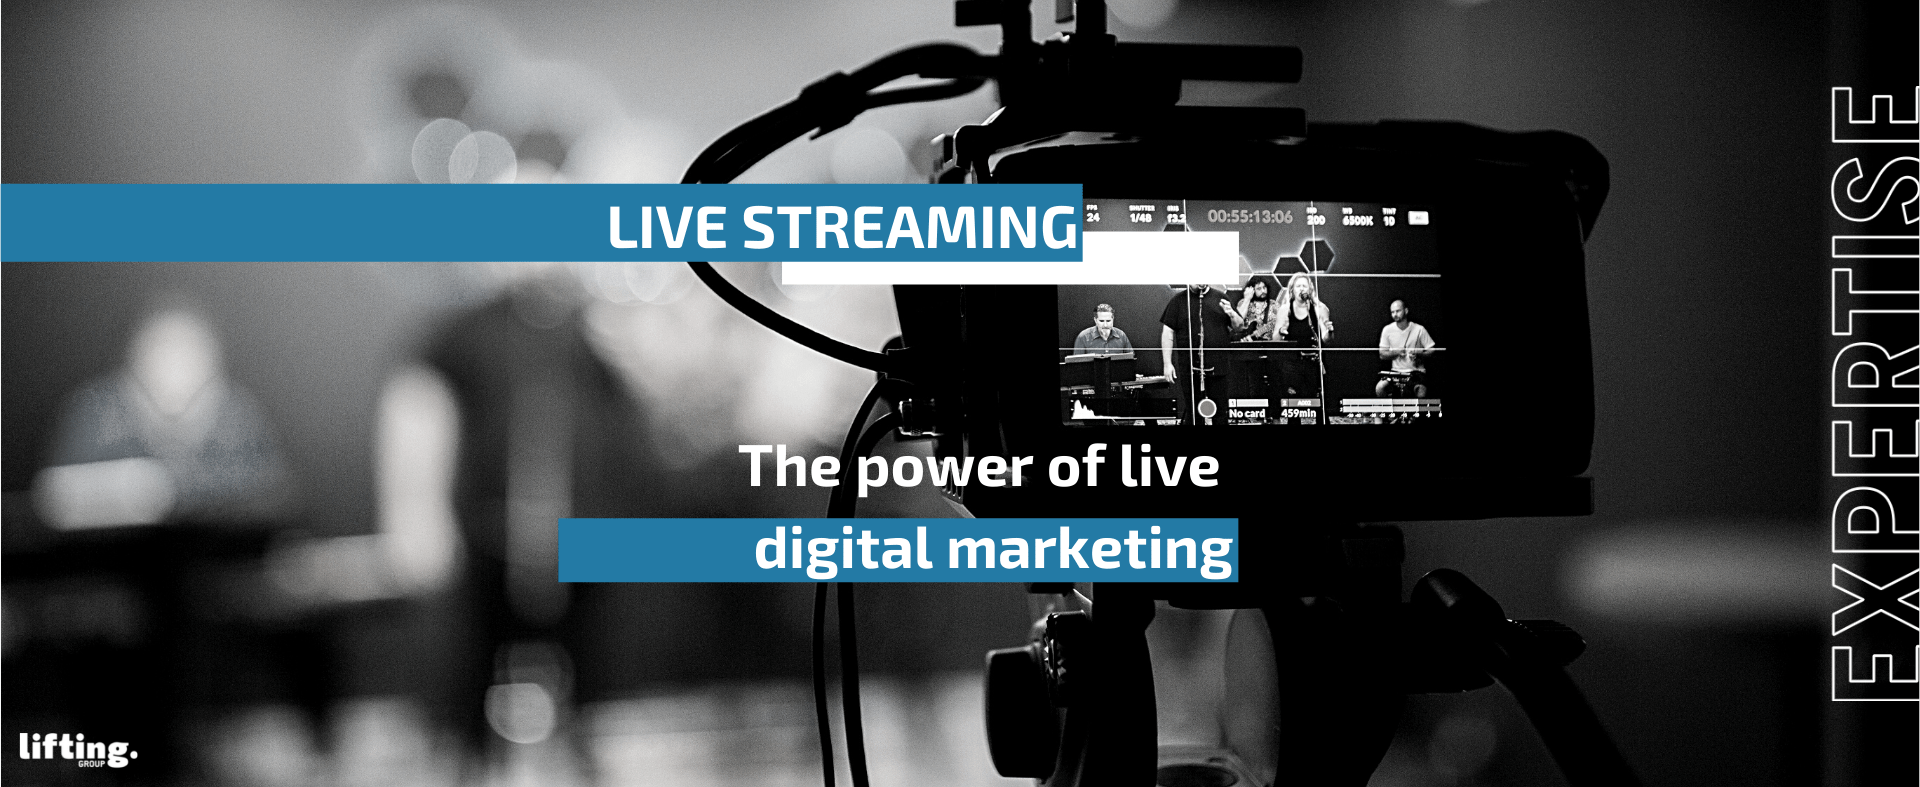 Livestreaming and the power of live digital marketing.